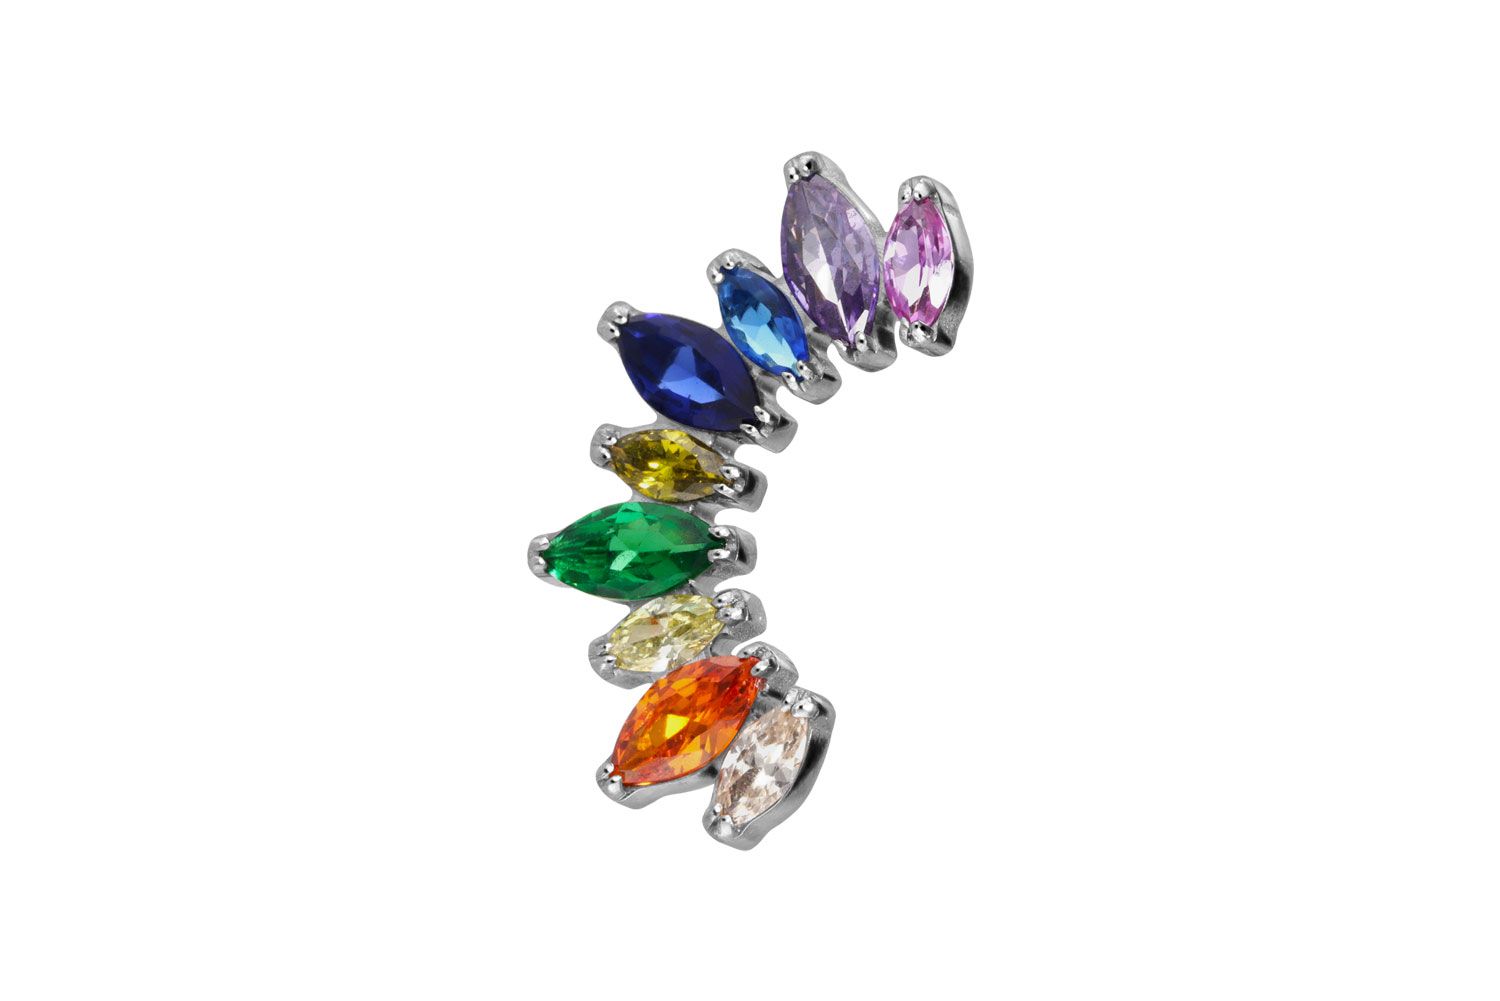 Titanium screw-in attachment with external thread MULTICOLORED CRYSTAL ARCH